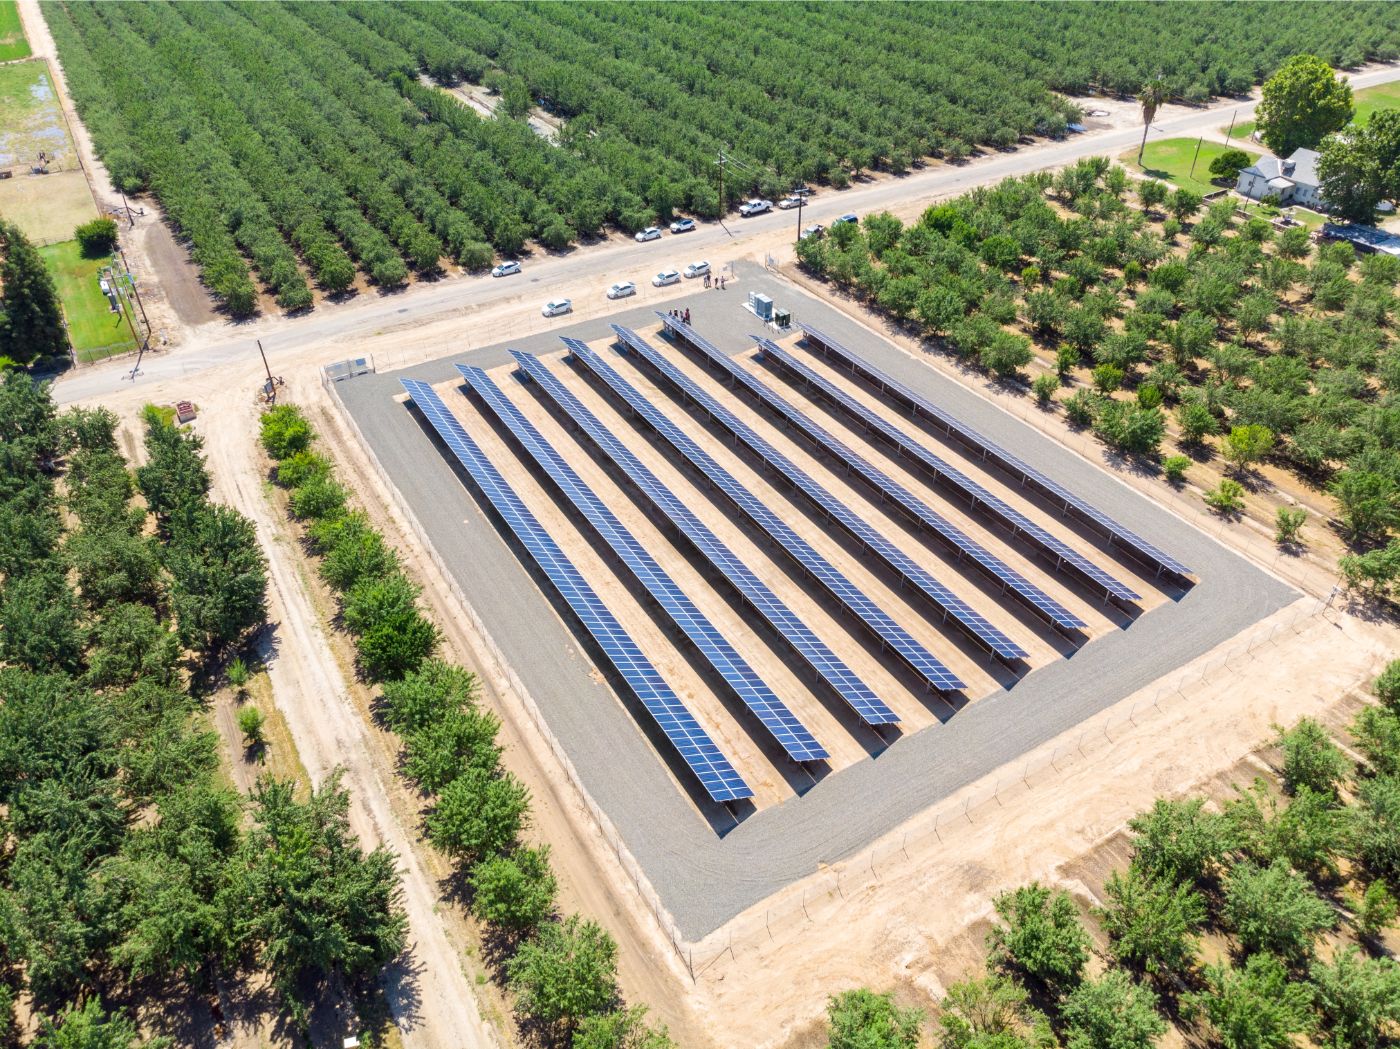 Aerial view of small solar installation in California agricultural land surrounded by planted crop trees.